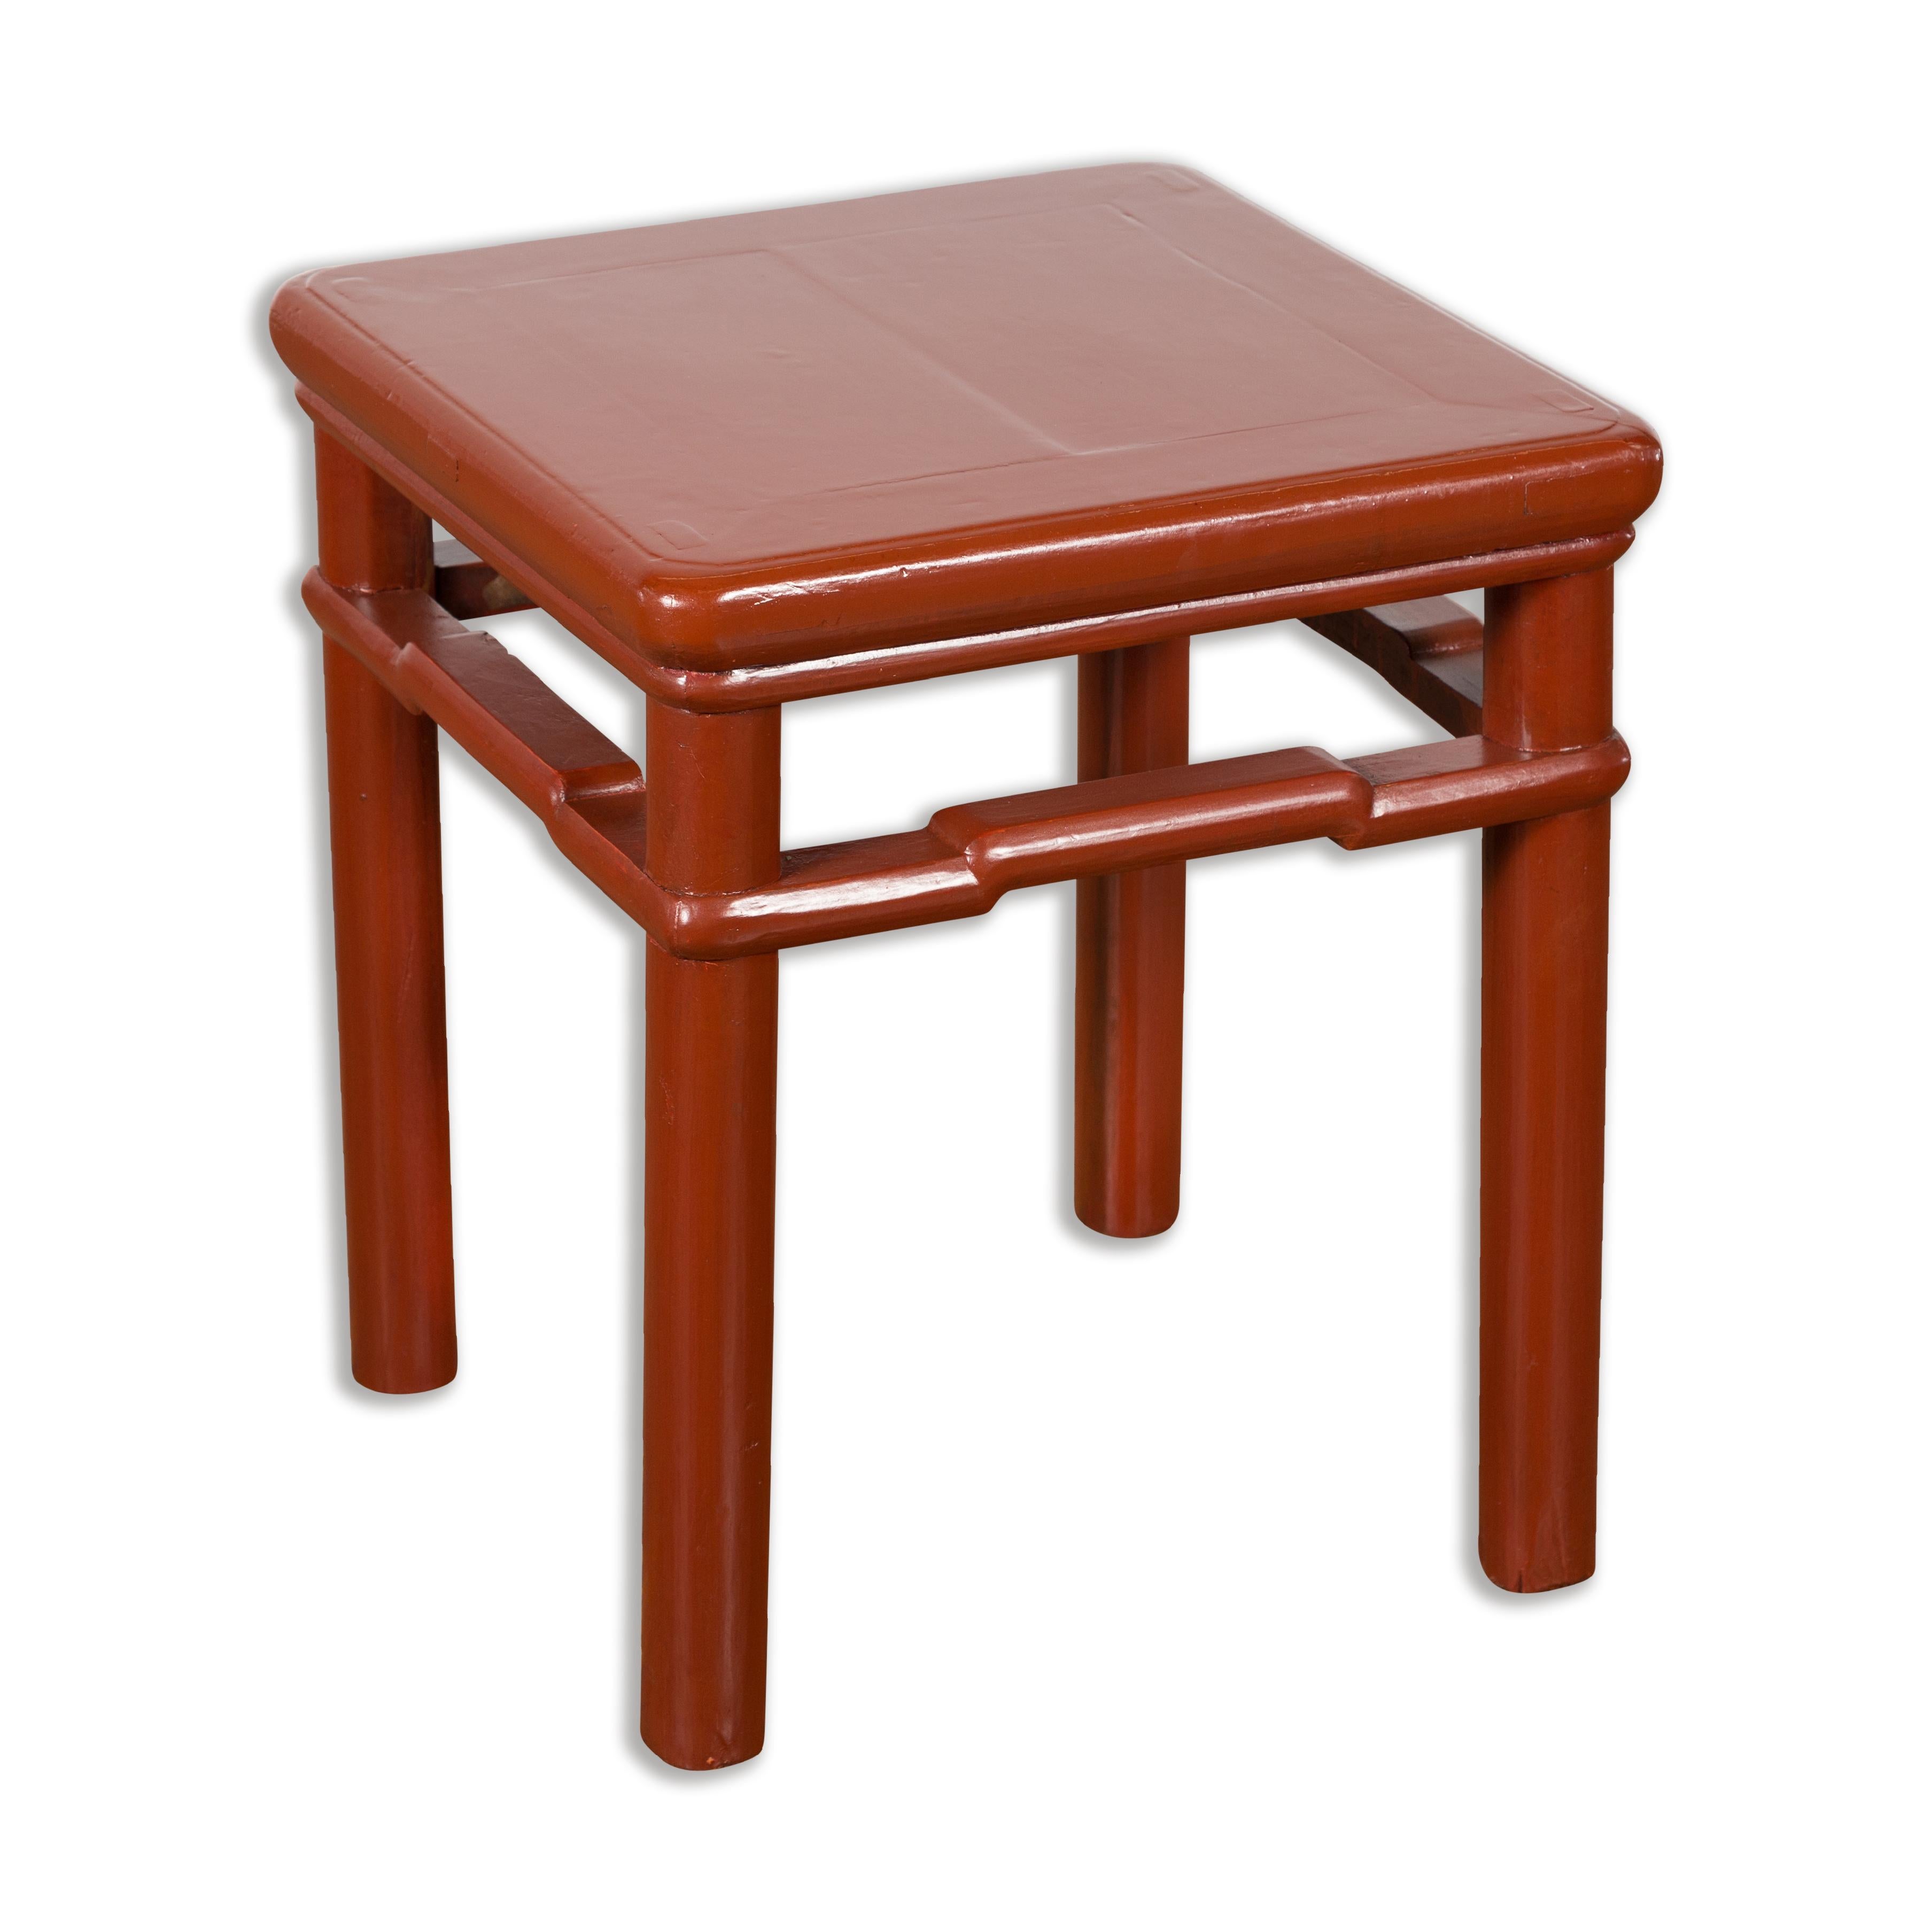 Chinese 1900s Qing Dynasty Red Lacquer Stool or Table with Humpback Stretchers For Sale 14